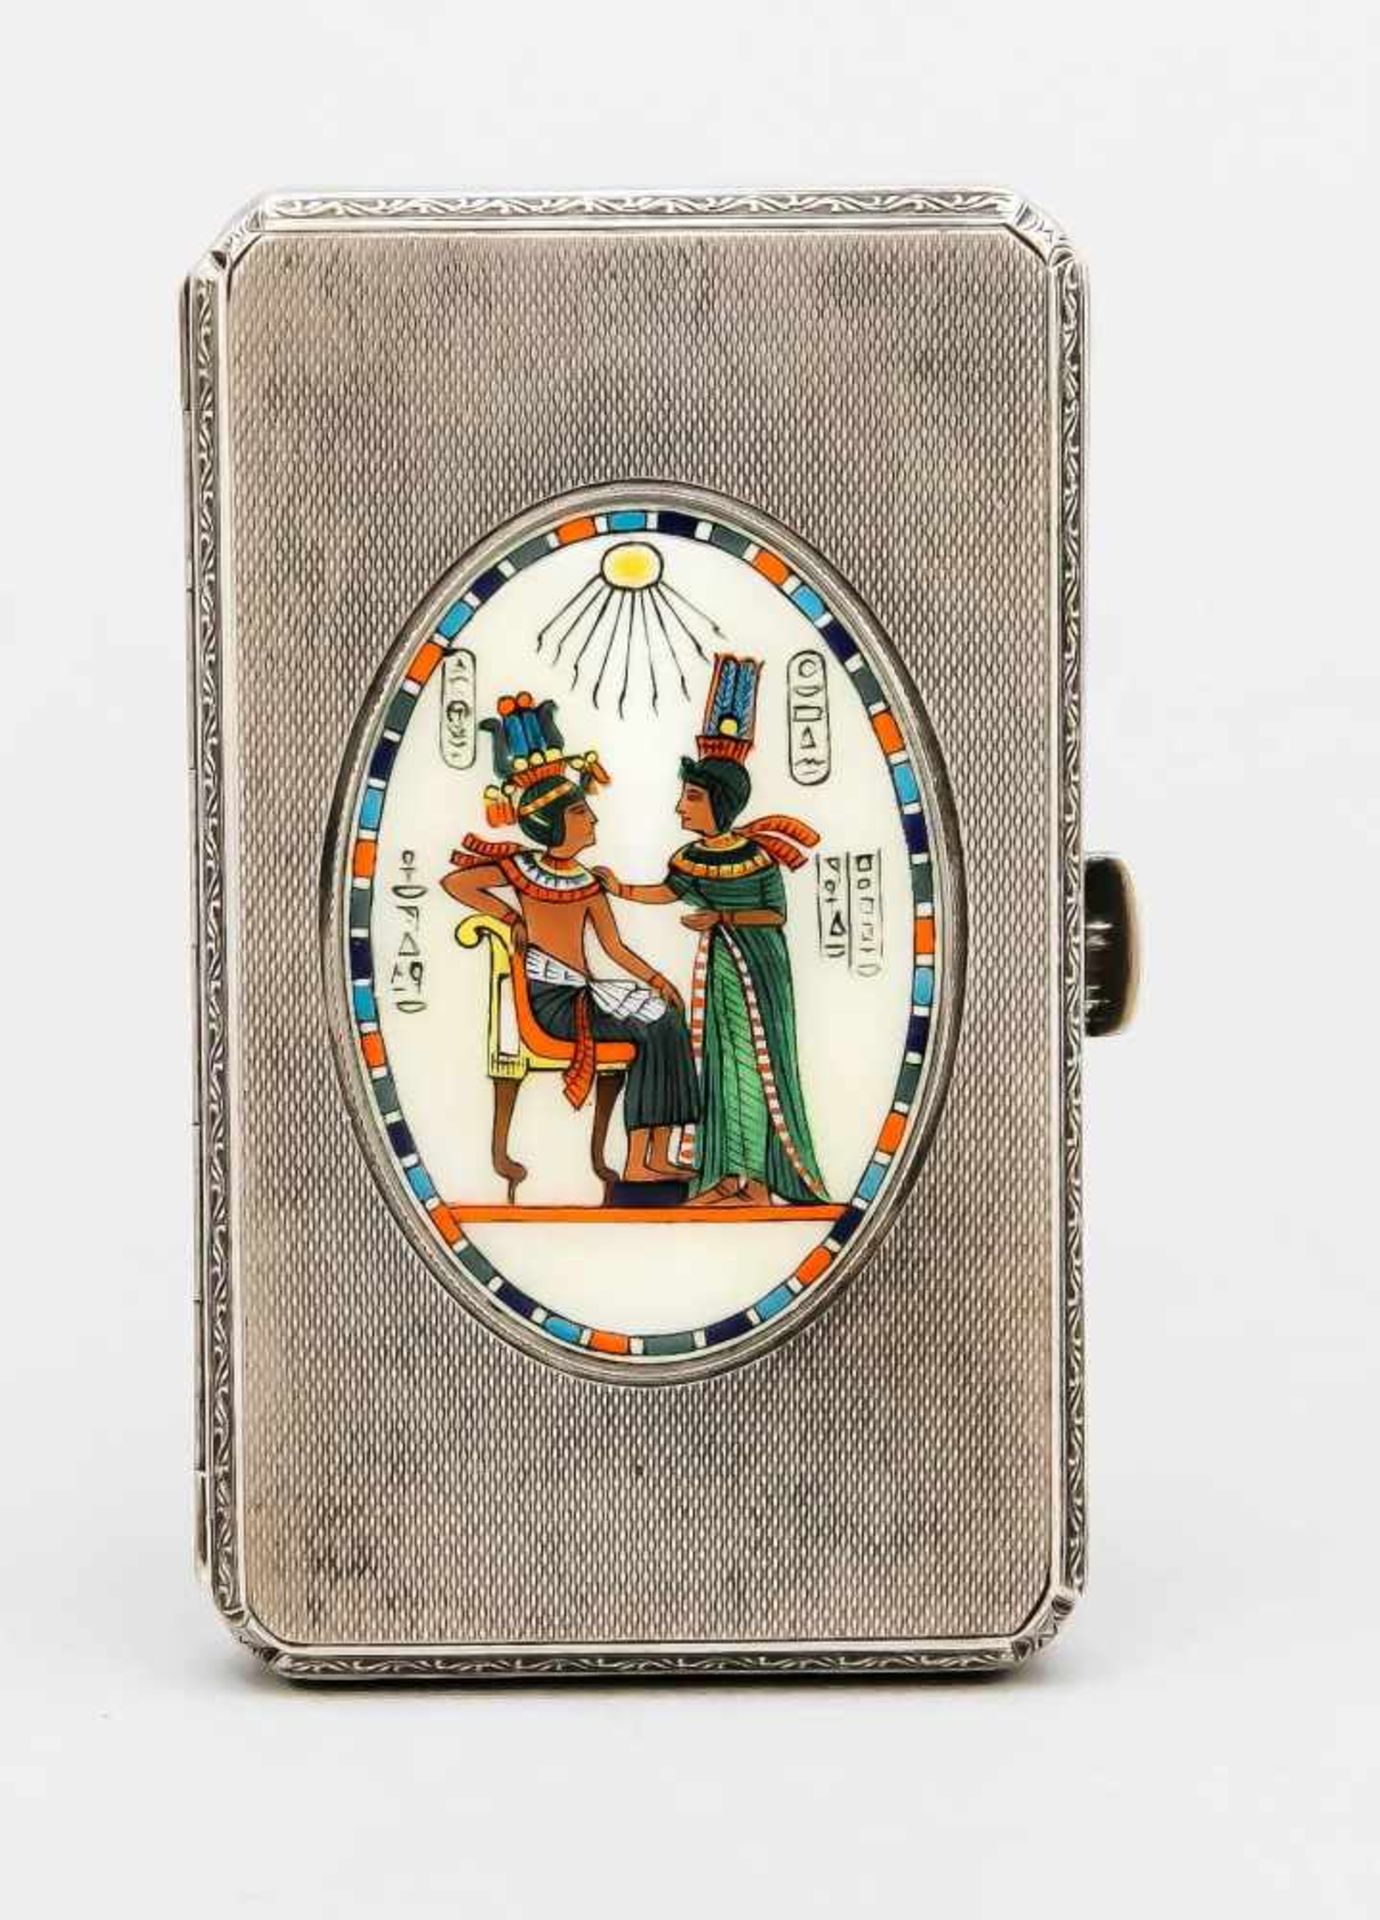 Cigarette case, 20th century, marked GK, silver 935/000, gilding inside, smooth form with